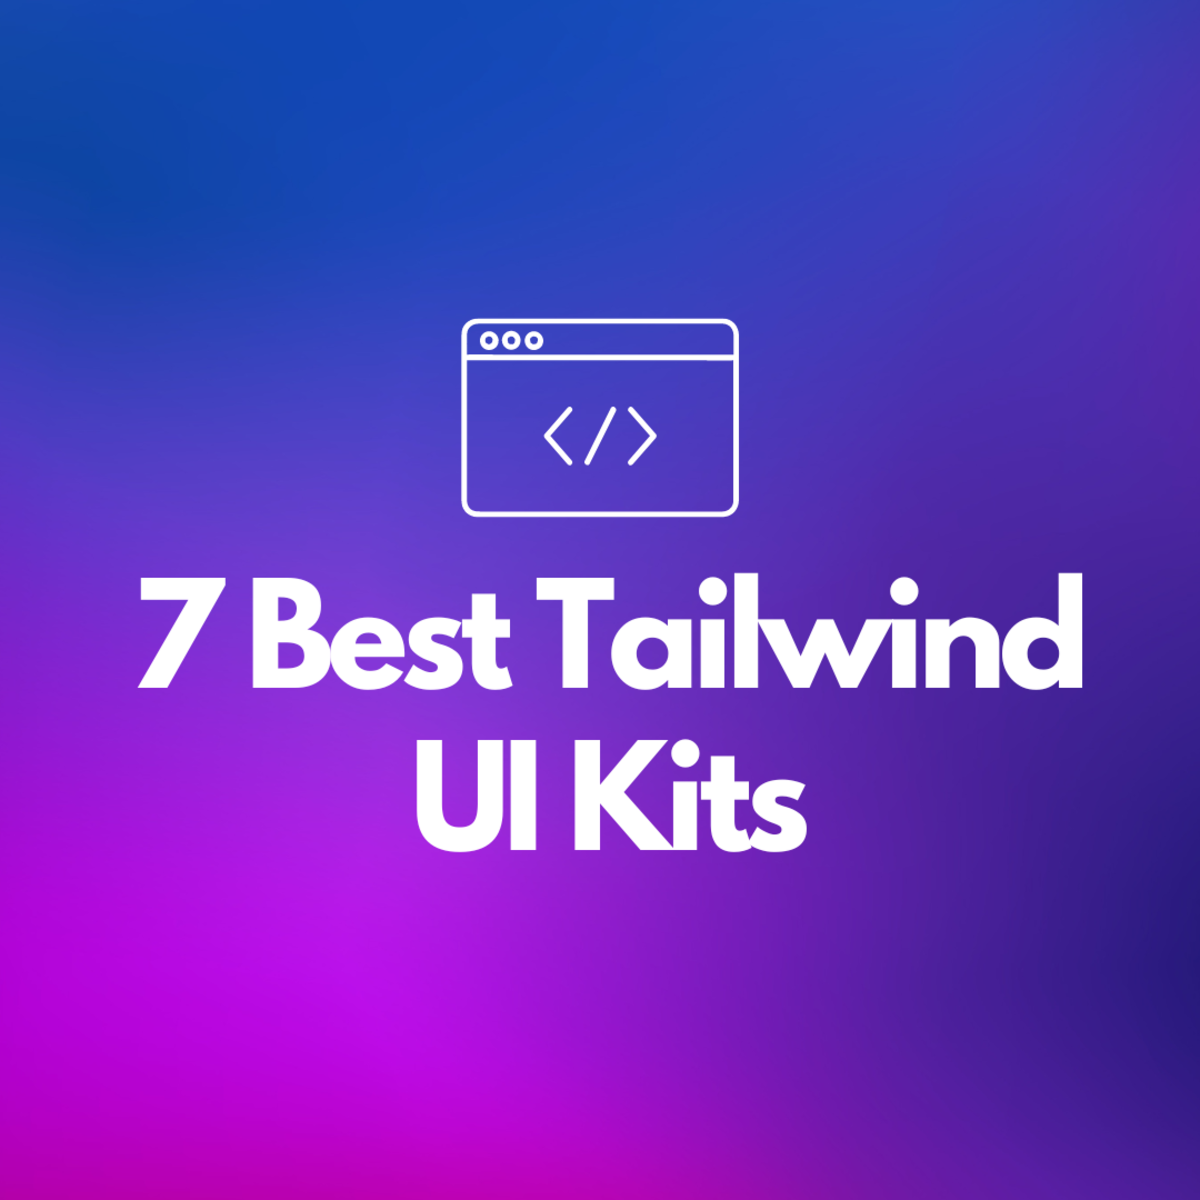 7 Best Tailwind UI Libraries and Kits for Your Next Web Project